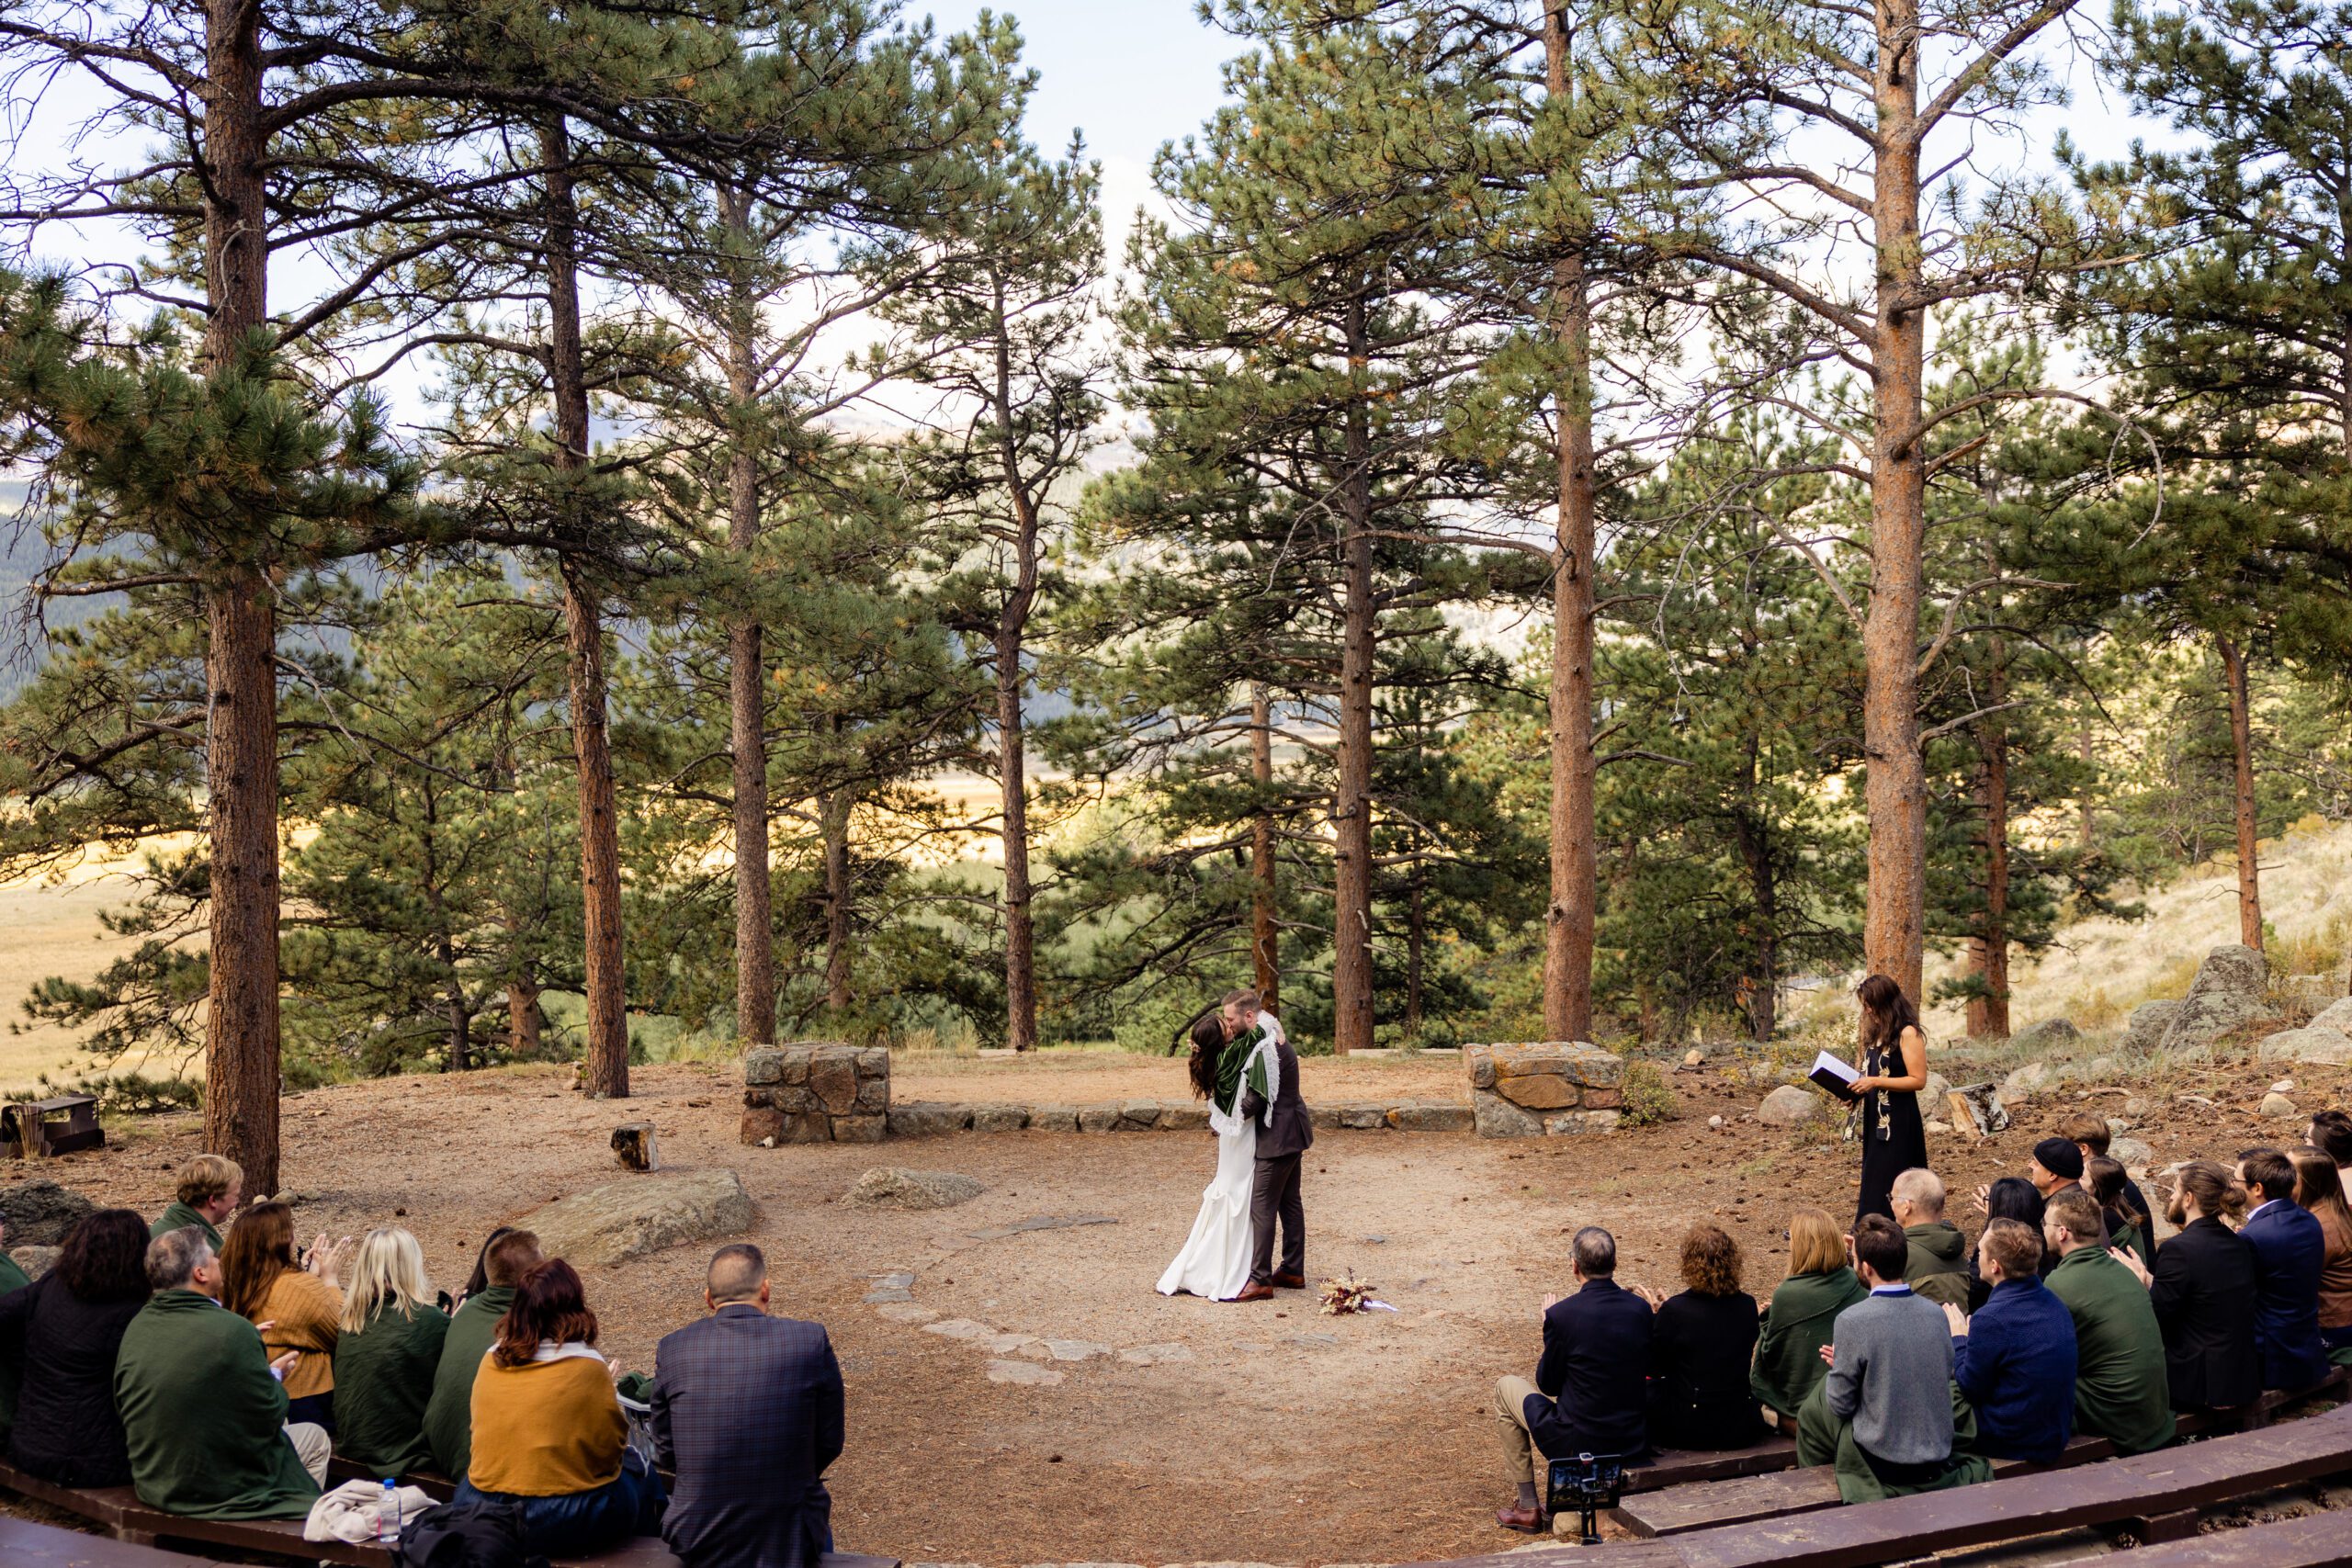 officially husband and wife, the bride and groom seal their love with a kiss at their Dream Lake elopement. 